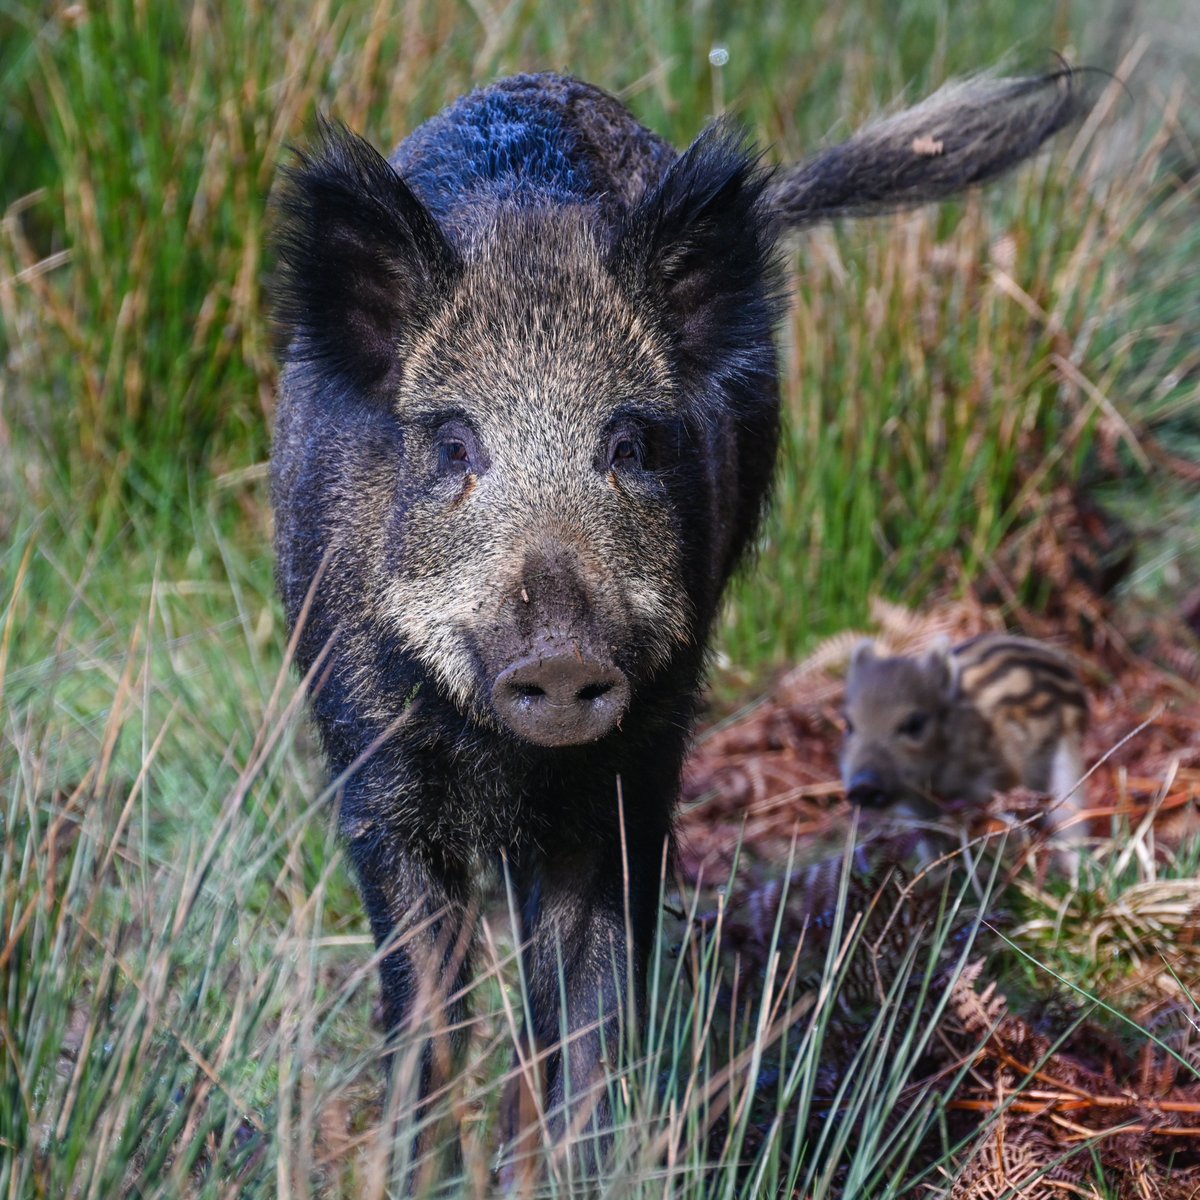 Photo highlights of a fantastic day in the Forest of Dean: my first time ever seeing wild boar piglets aka humbugs 😊
With many thanks to @thomas_winstone 
#BBCWildlifePOTD #ForestOfDean @VisitDeanWye @Mammal_Society